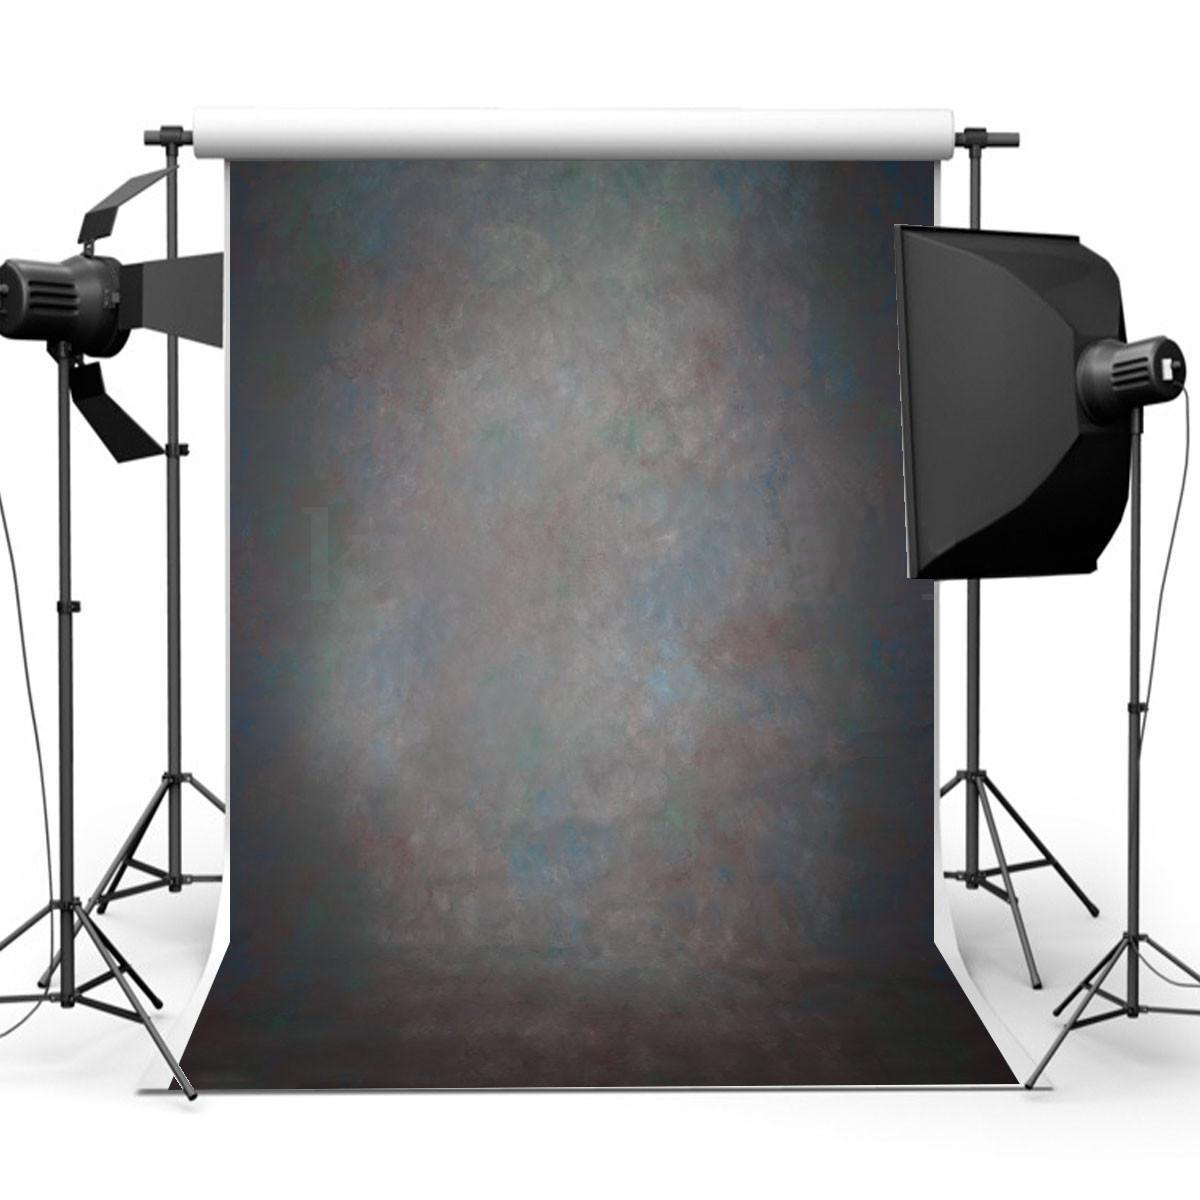 YouLoveIt Studio Photo Video Photography Backdrops 5x7ft Studio Photo Video Background Screen Props Camera & Photo Studio Props, 20+ colors - image 2 of 4